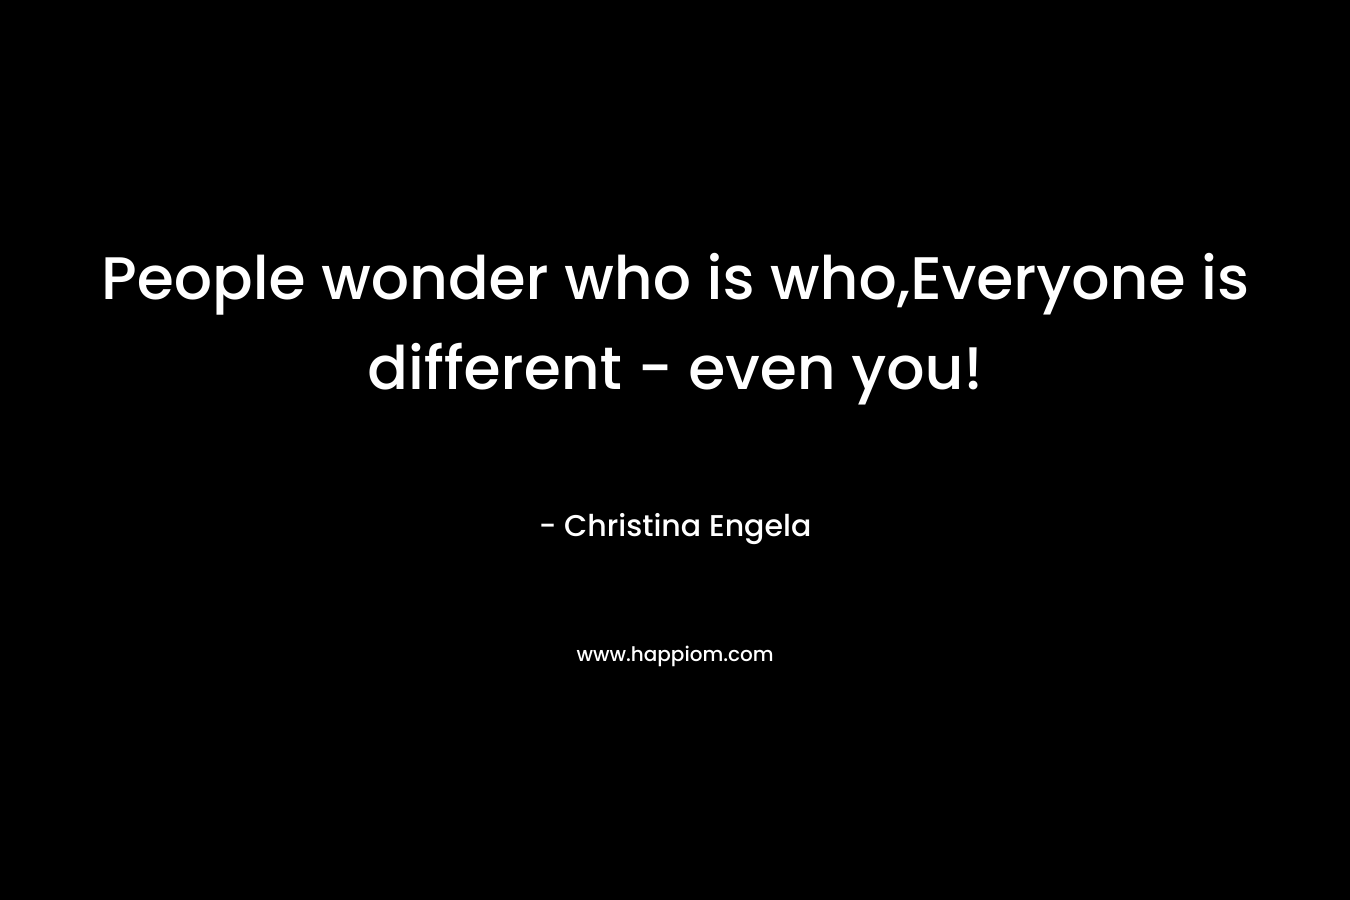 People wonder who is who,Everyone is different - even you!